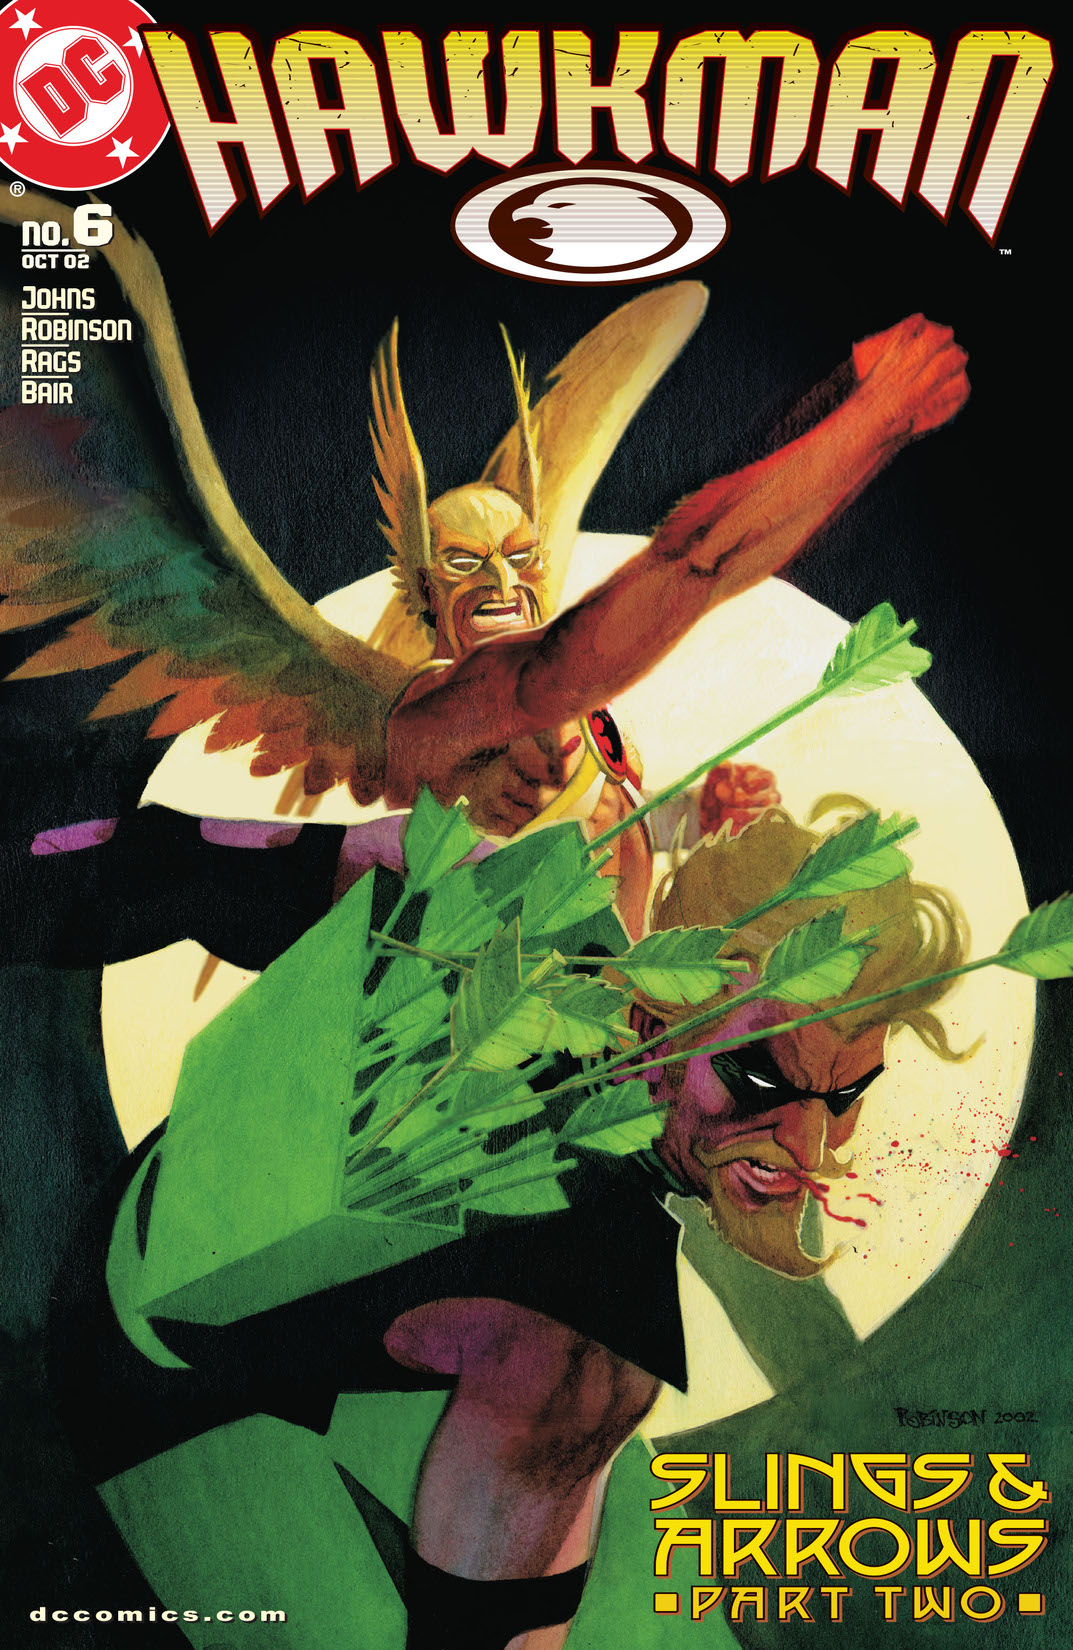 Hawkman (2002-) #6 preview images